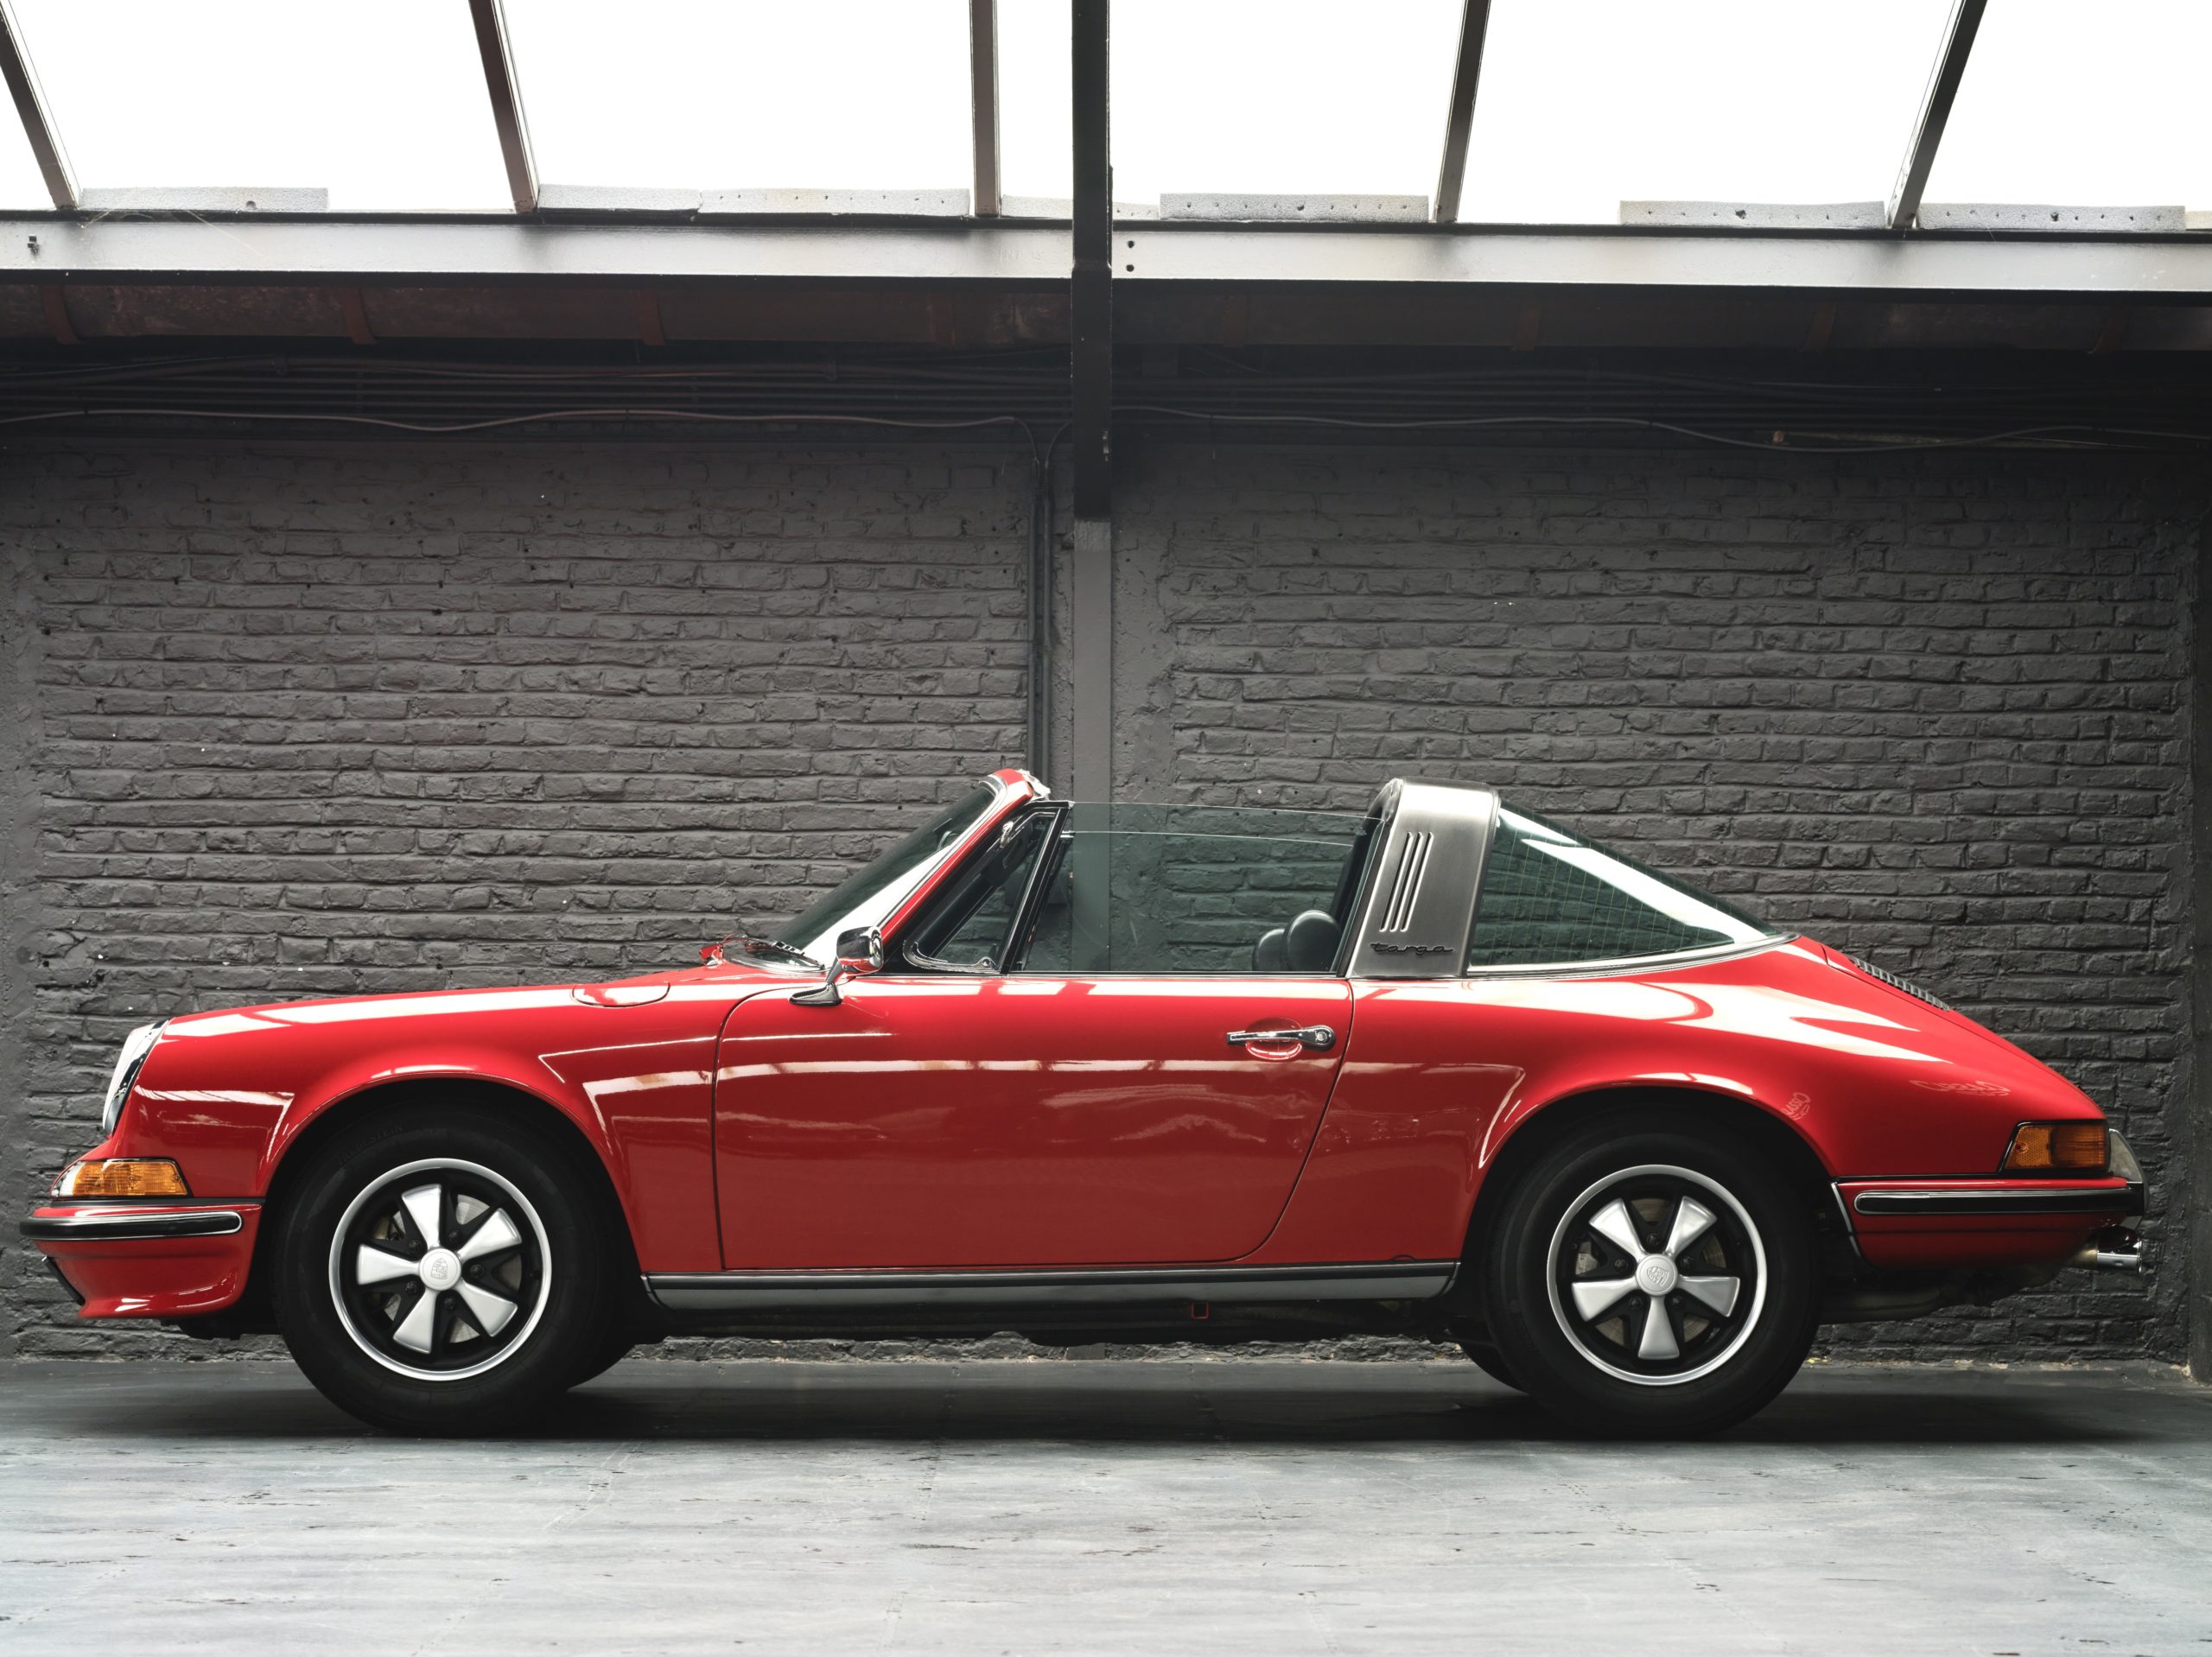 Exterior of a 1973 Red Bahia Porsche 911 2.4E Targa fully restored in 2019 with 12.685 km and black leather interior